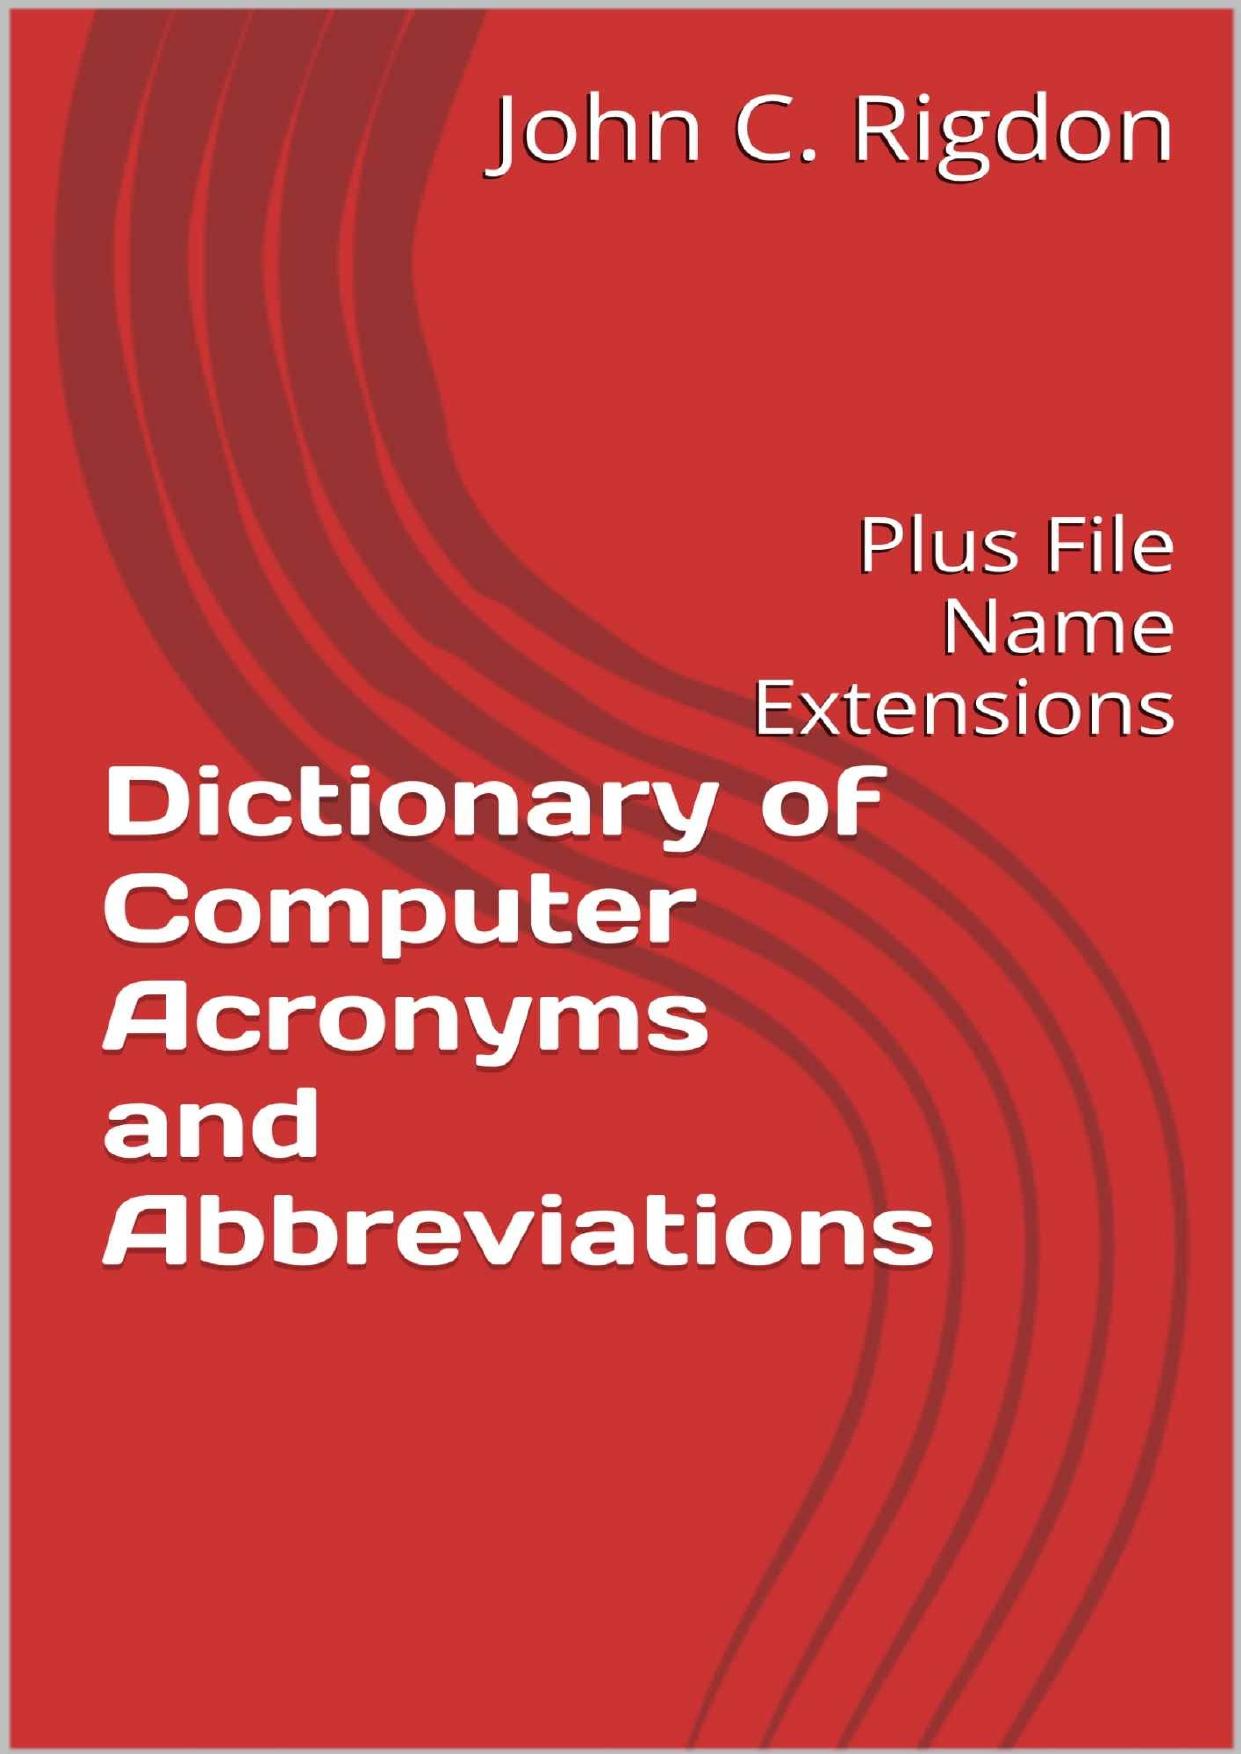 Dictionary of Computer Acronyms and Abbreviations: Plus File Name Extensions (Words R Us Computer Dictionaries Book 2)